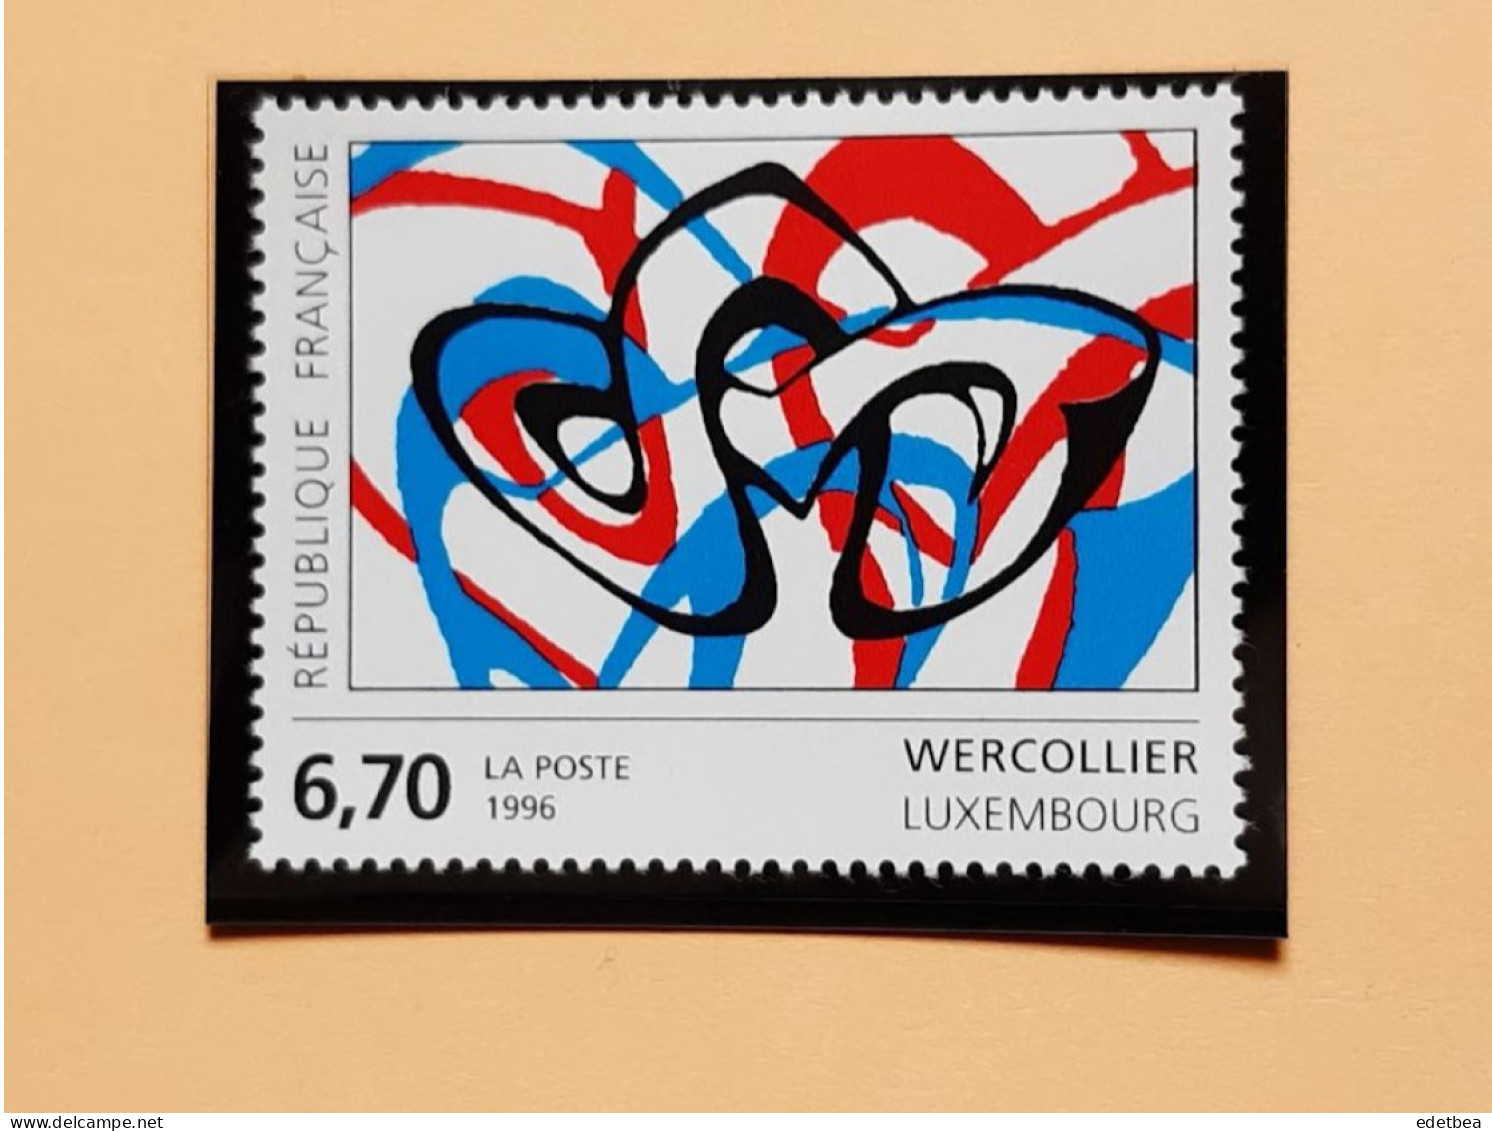 Timbre – France – 1996- N° 2986-  Oeuvre De Lucien WERCOLLIER : Oeuvre Originale -Etat : Neuf - Unused Stamps